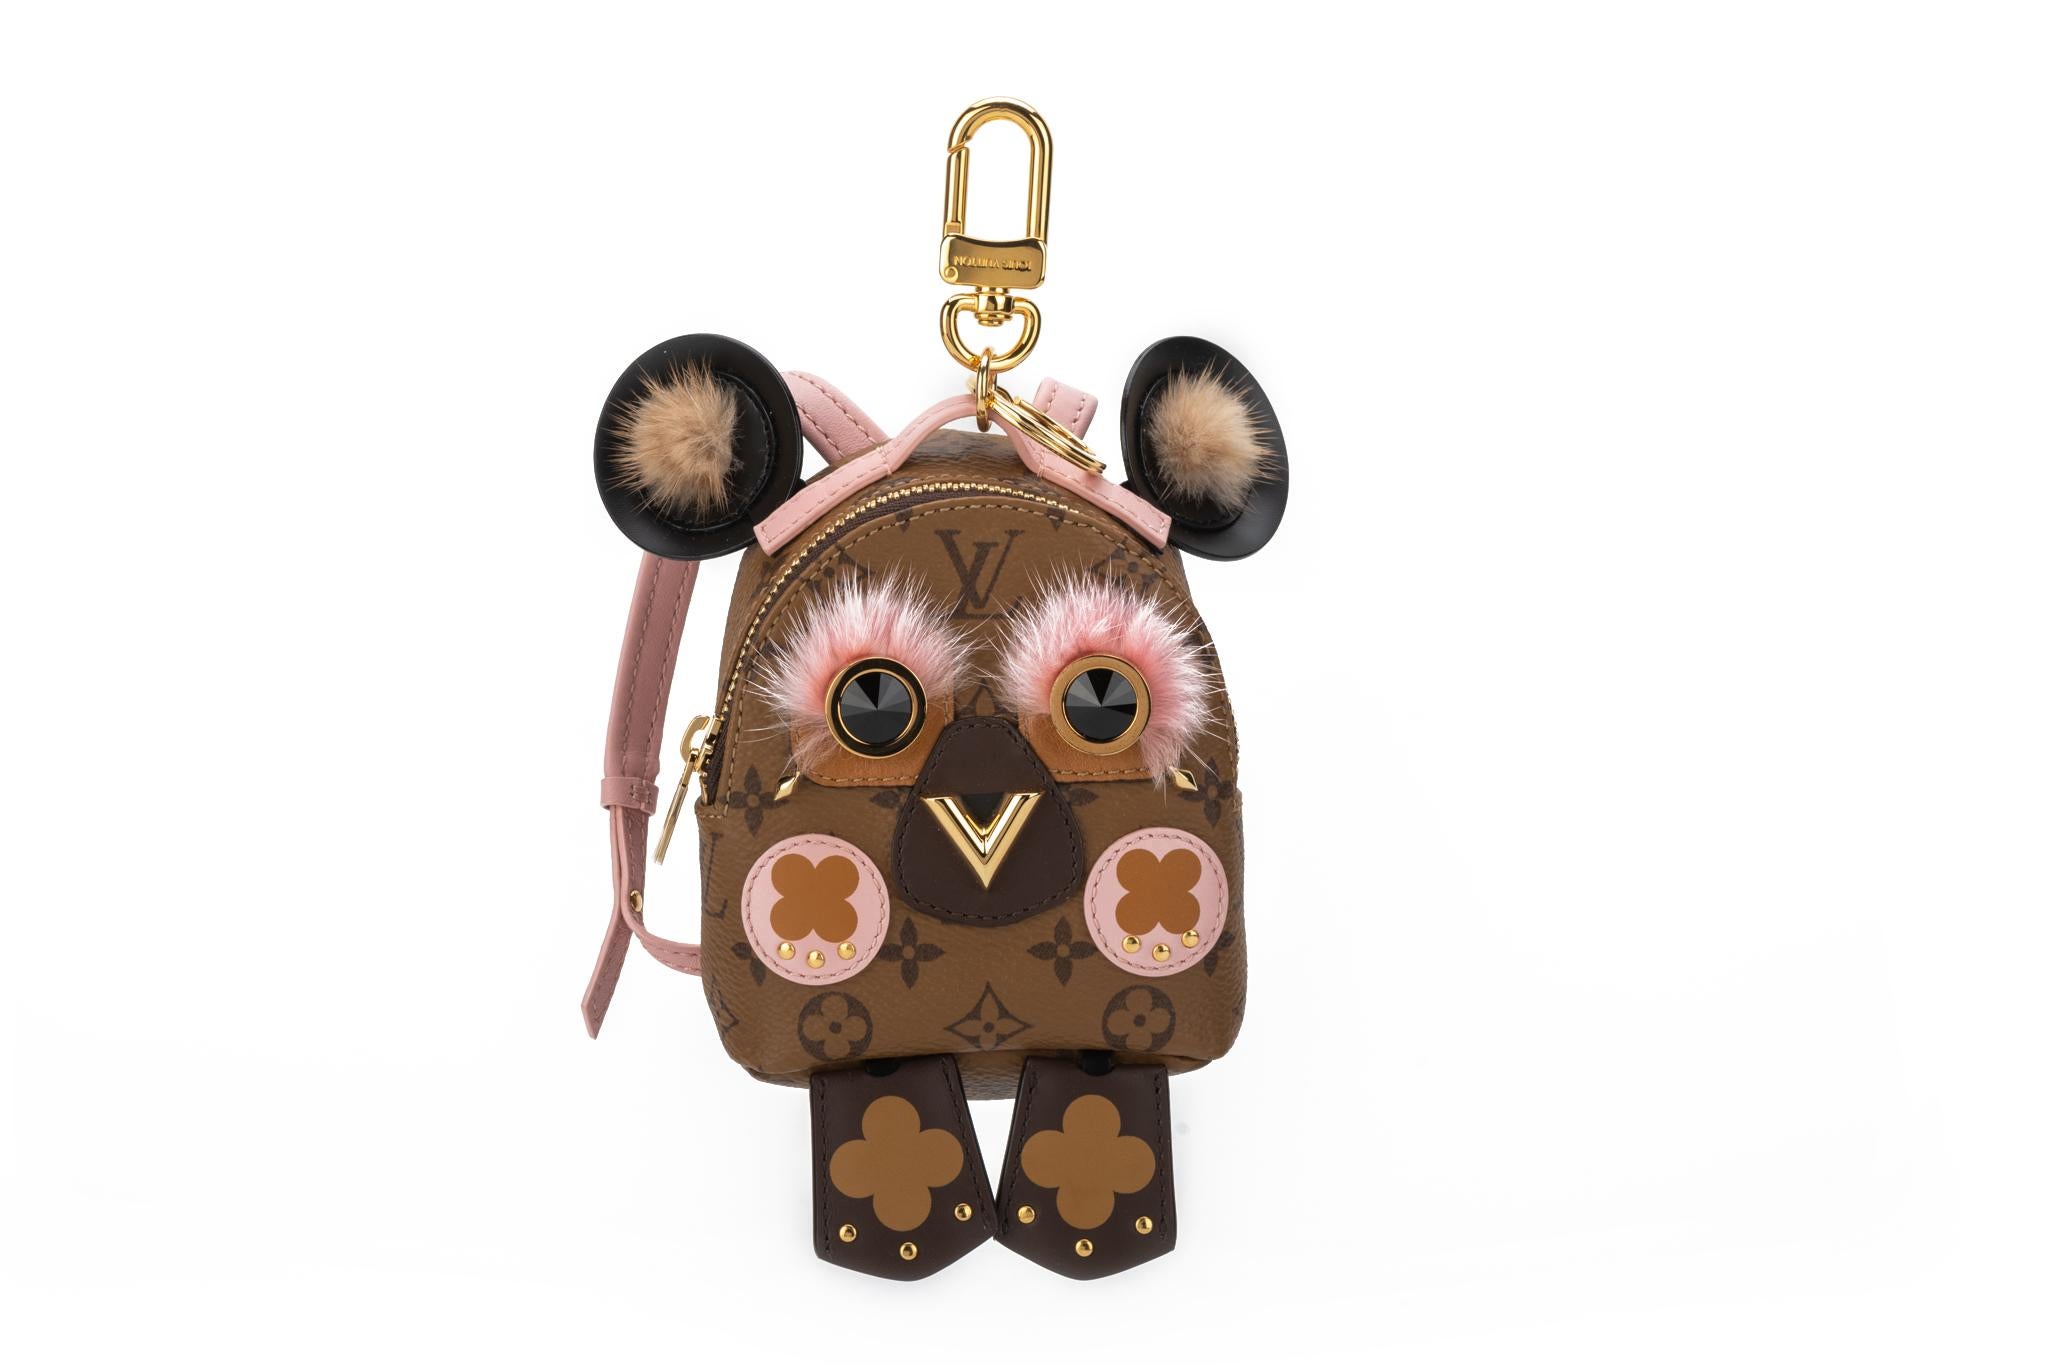 Orange New in Box Rare Louis Vuitton Mini Owl Backpack Charm For Sale